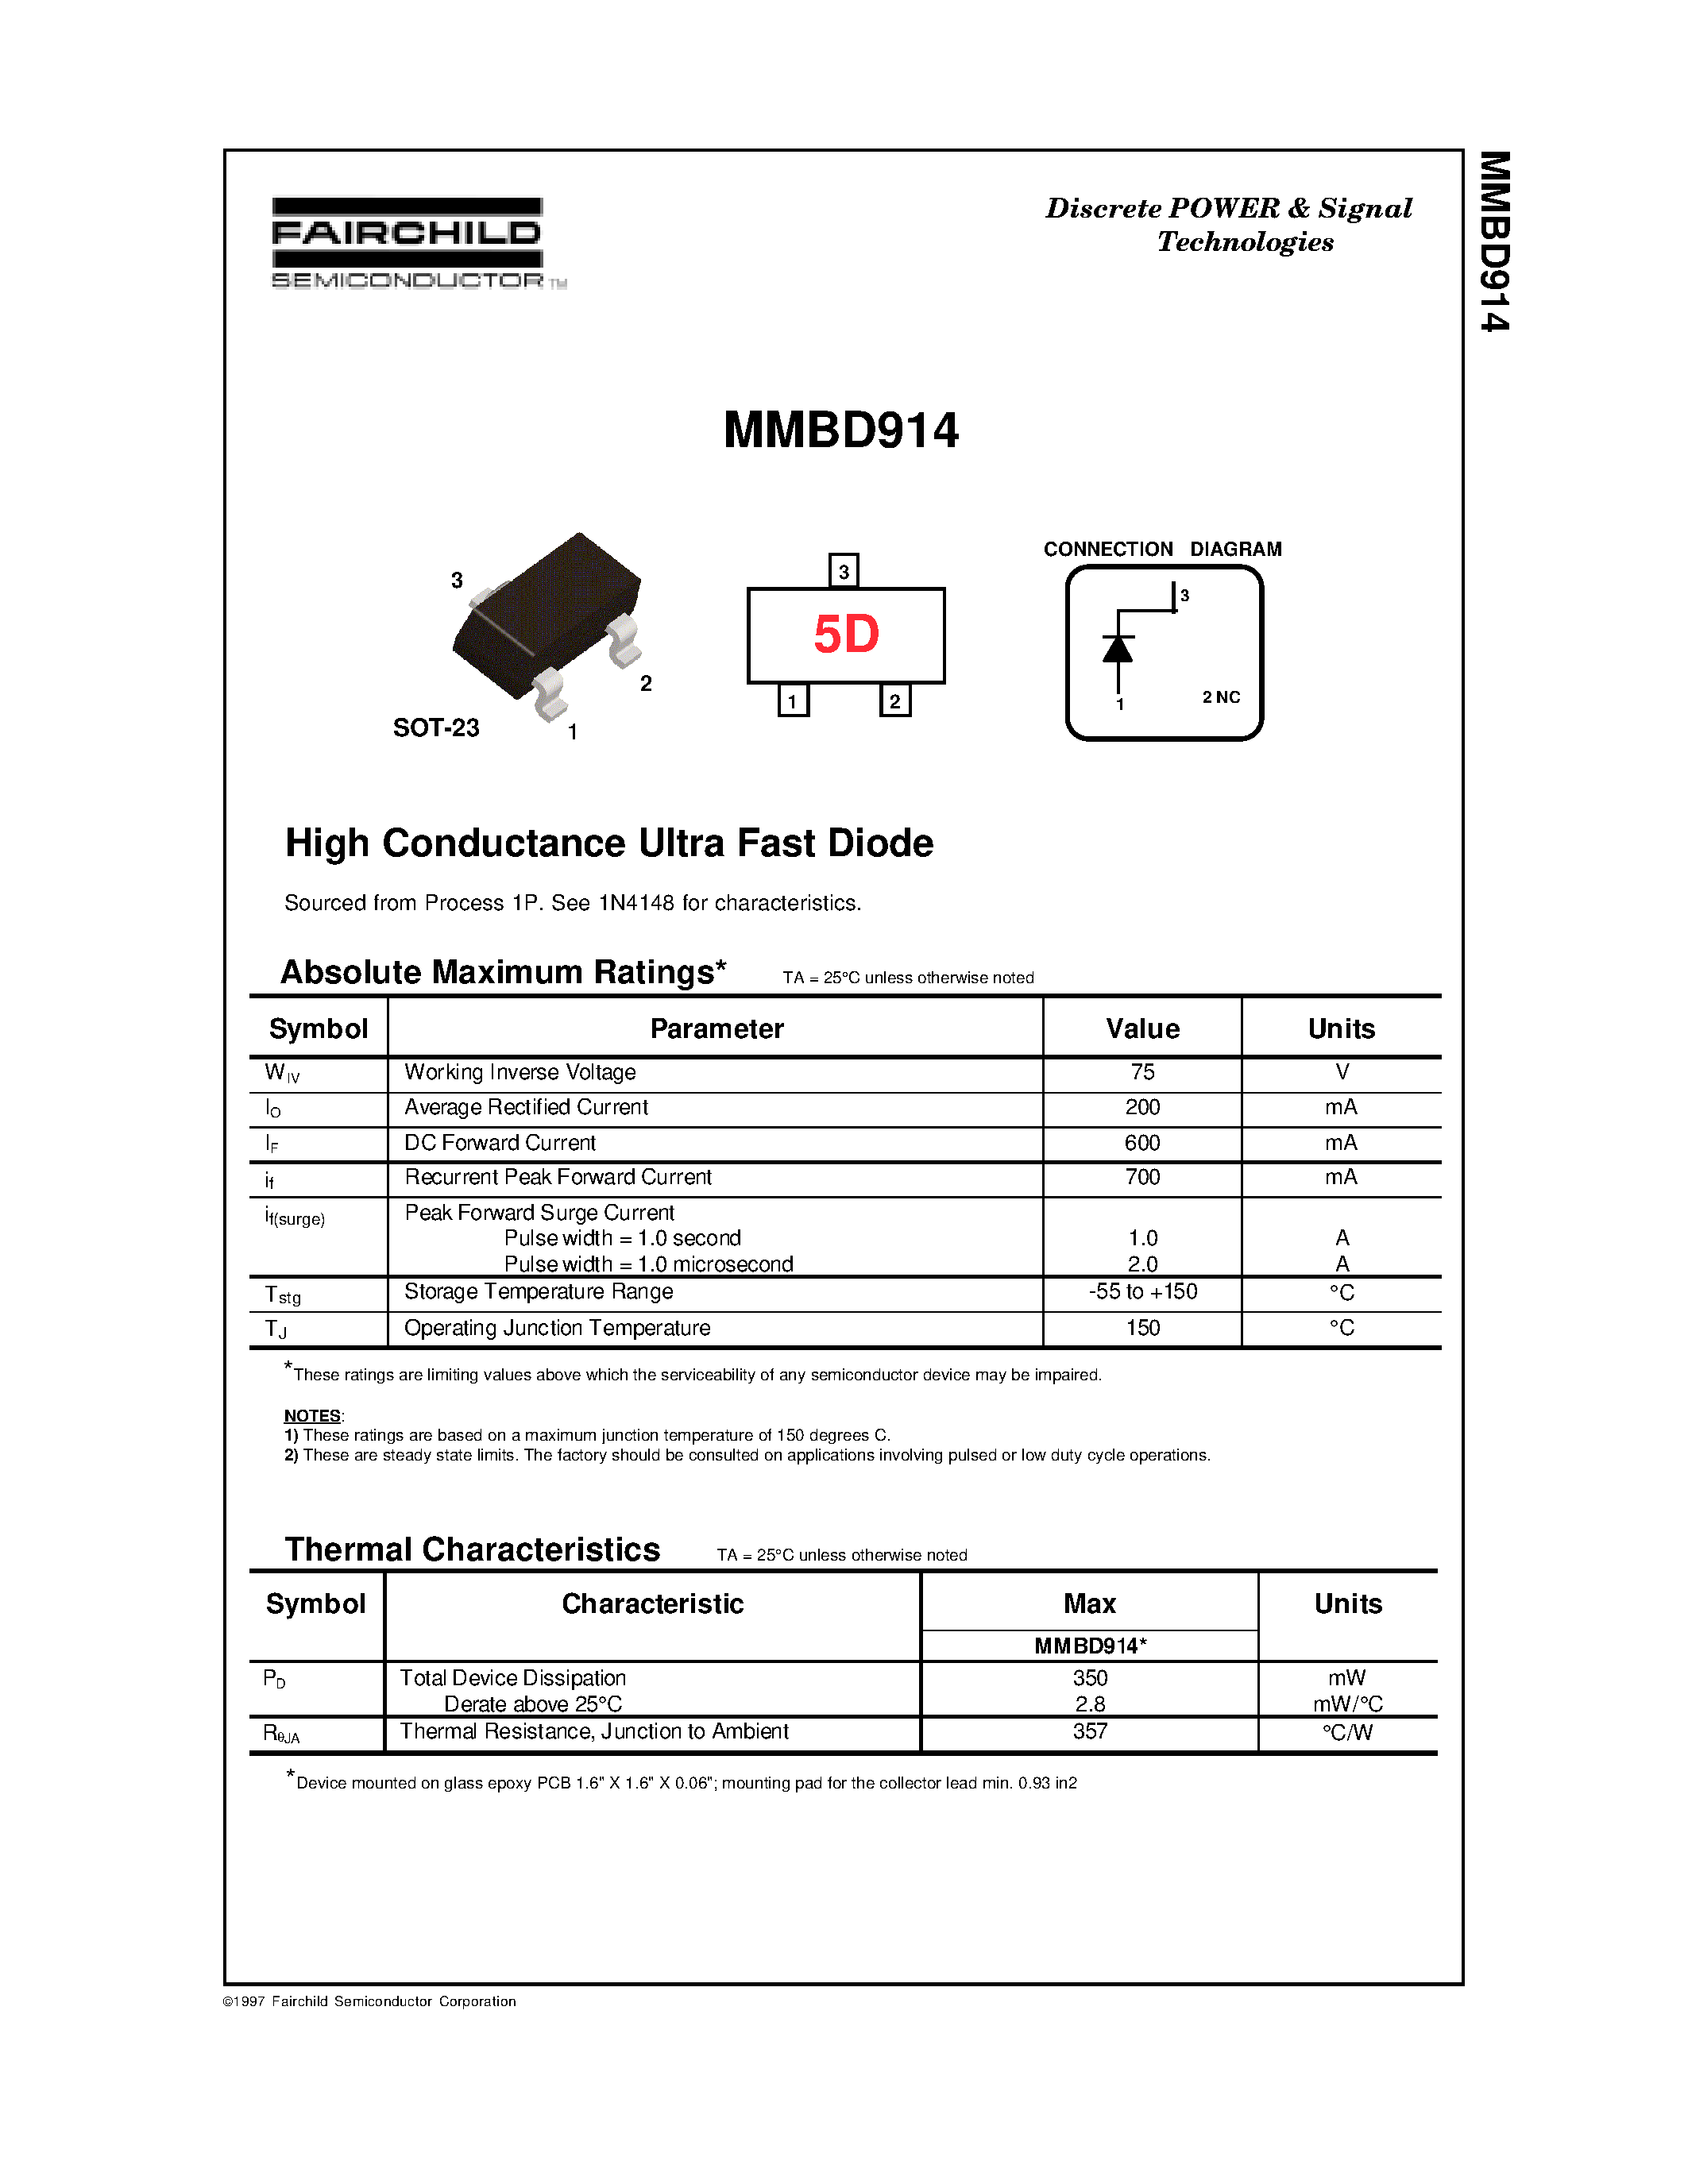 Datasheet MMBD914 - High Conductance Ultra Fast Diode page 1